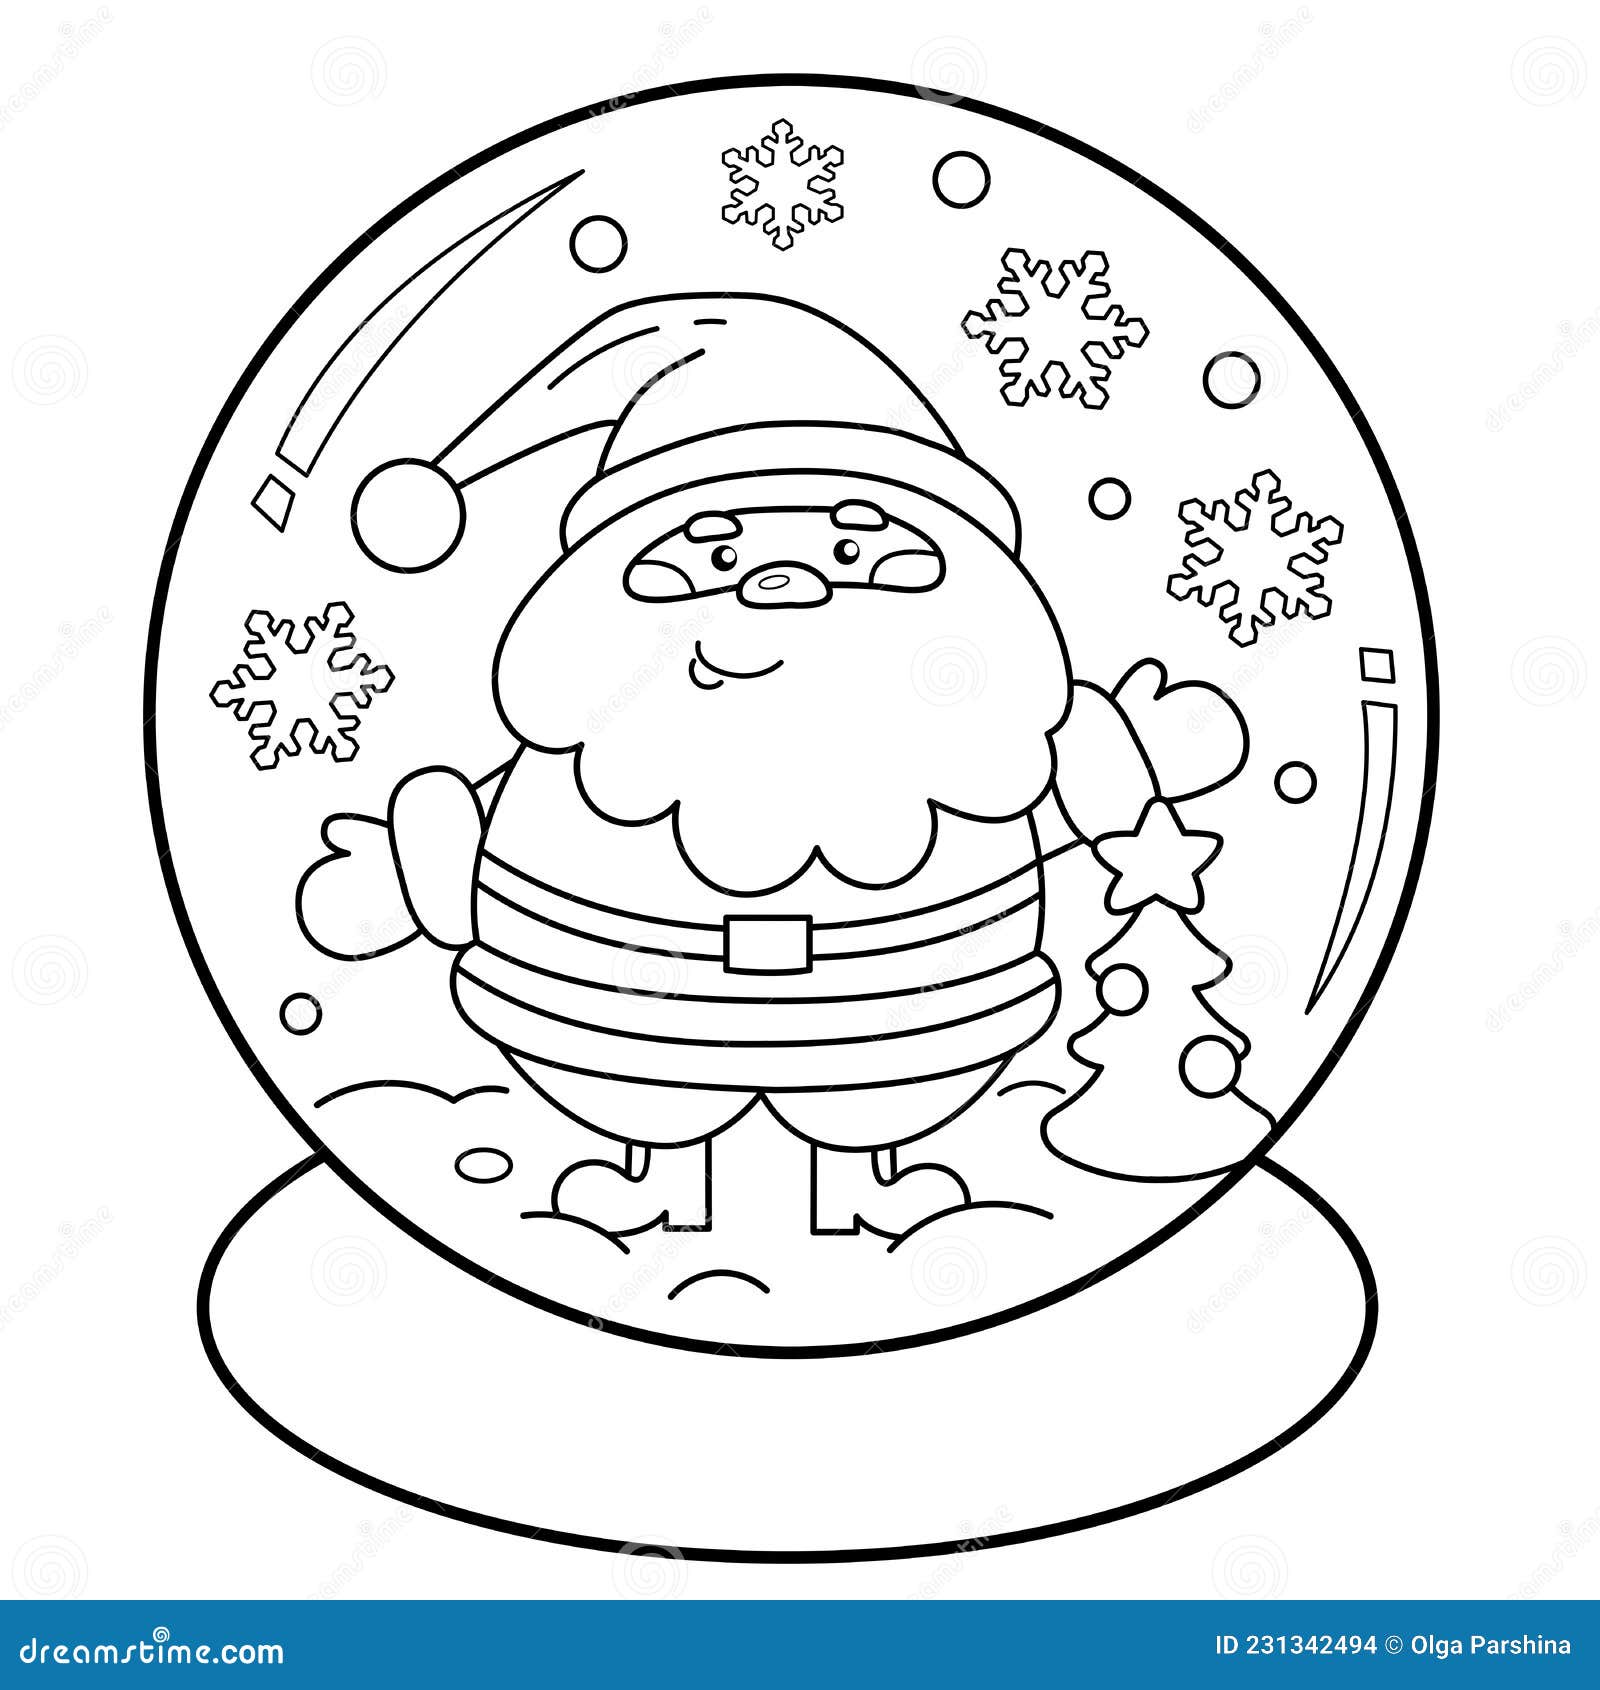 Coloring page outline of snow globe with santa claus with christmas tree new year christmas stock vector